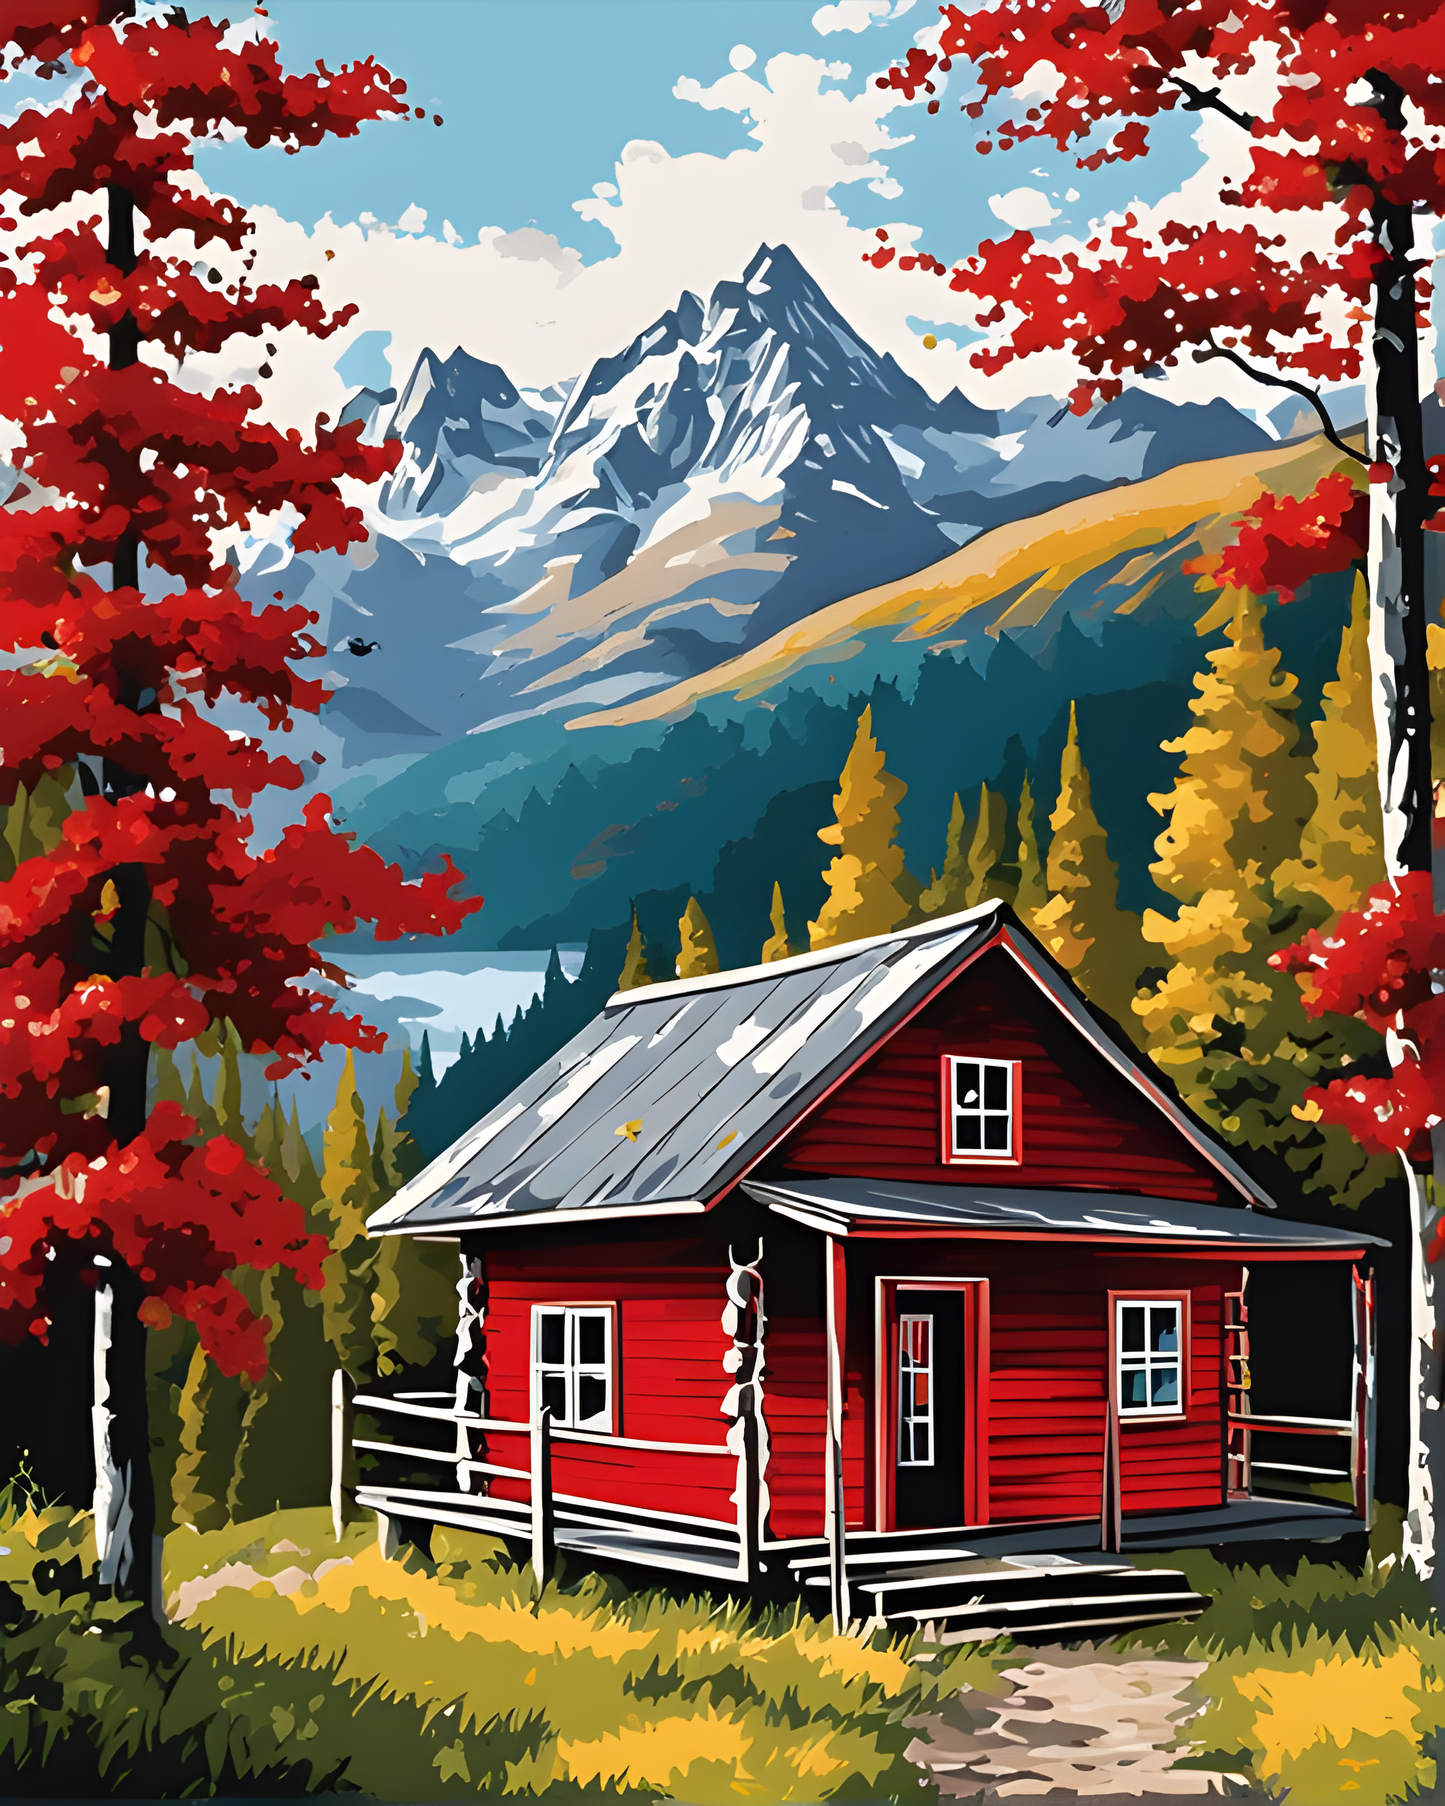 Red Cabin in the Mountains (3) - Van-Go Paint-By-Number Kit